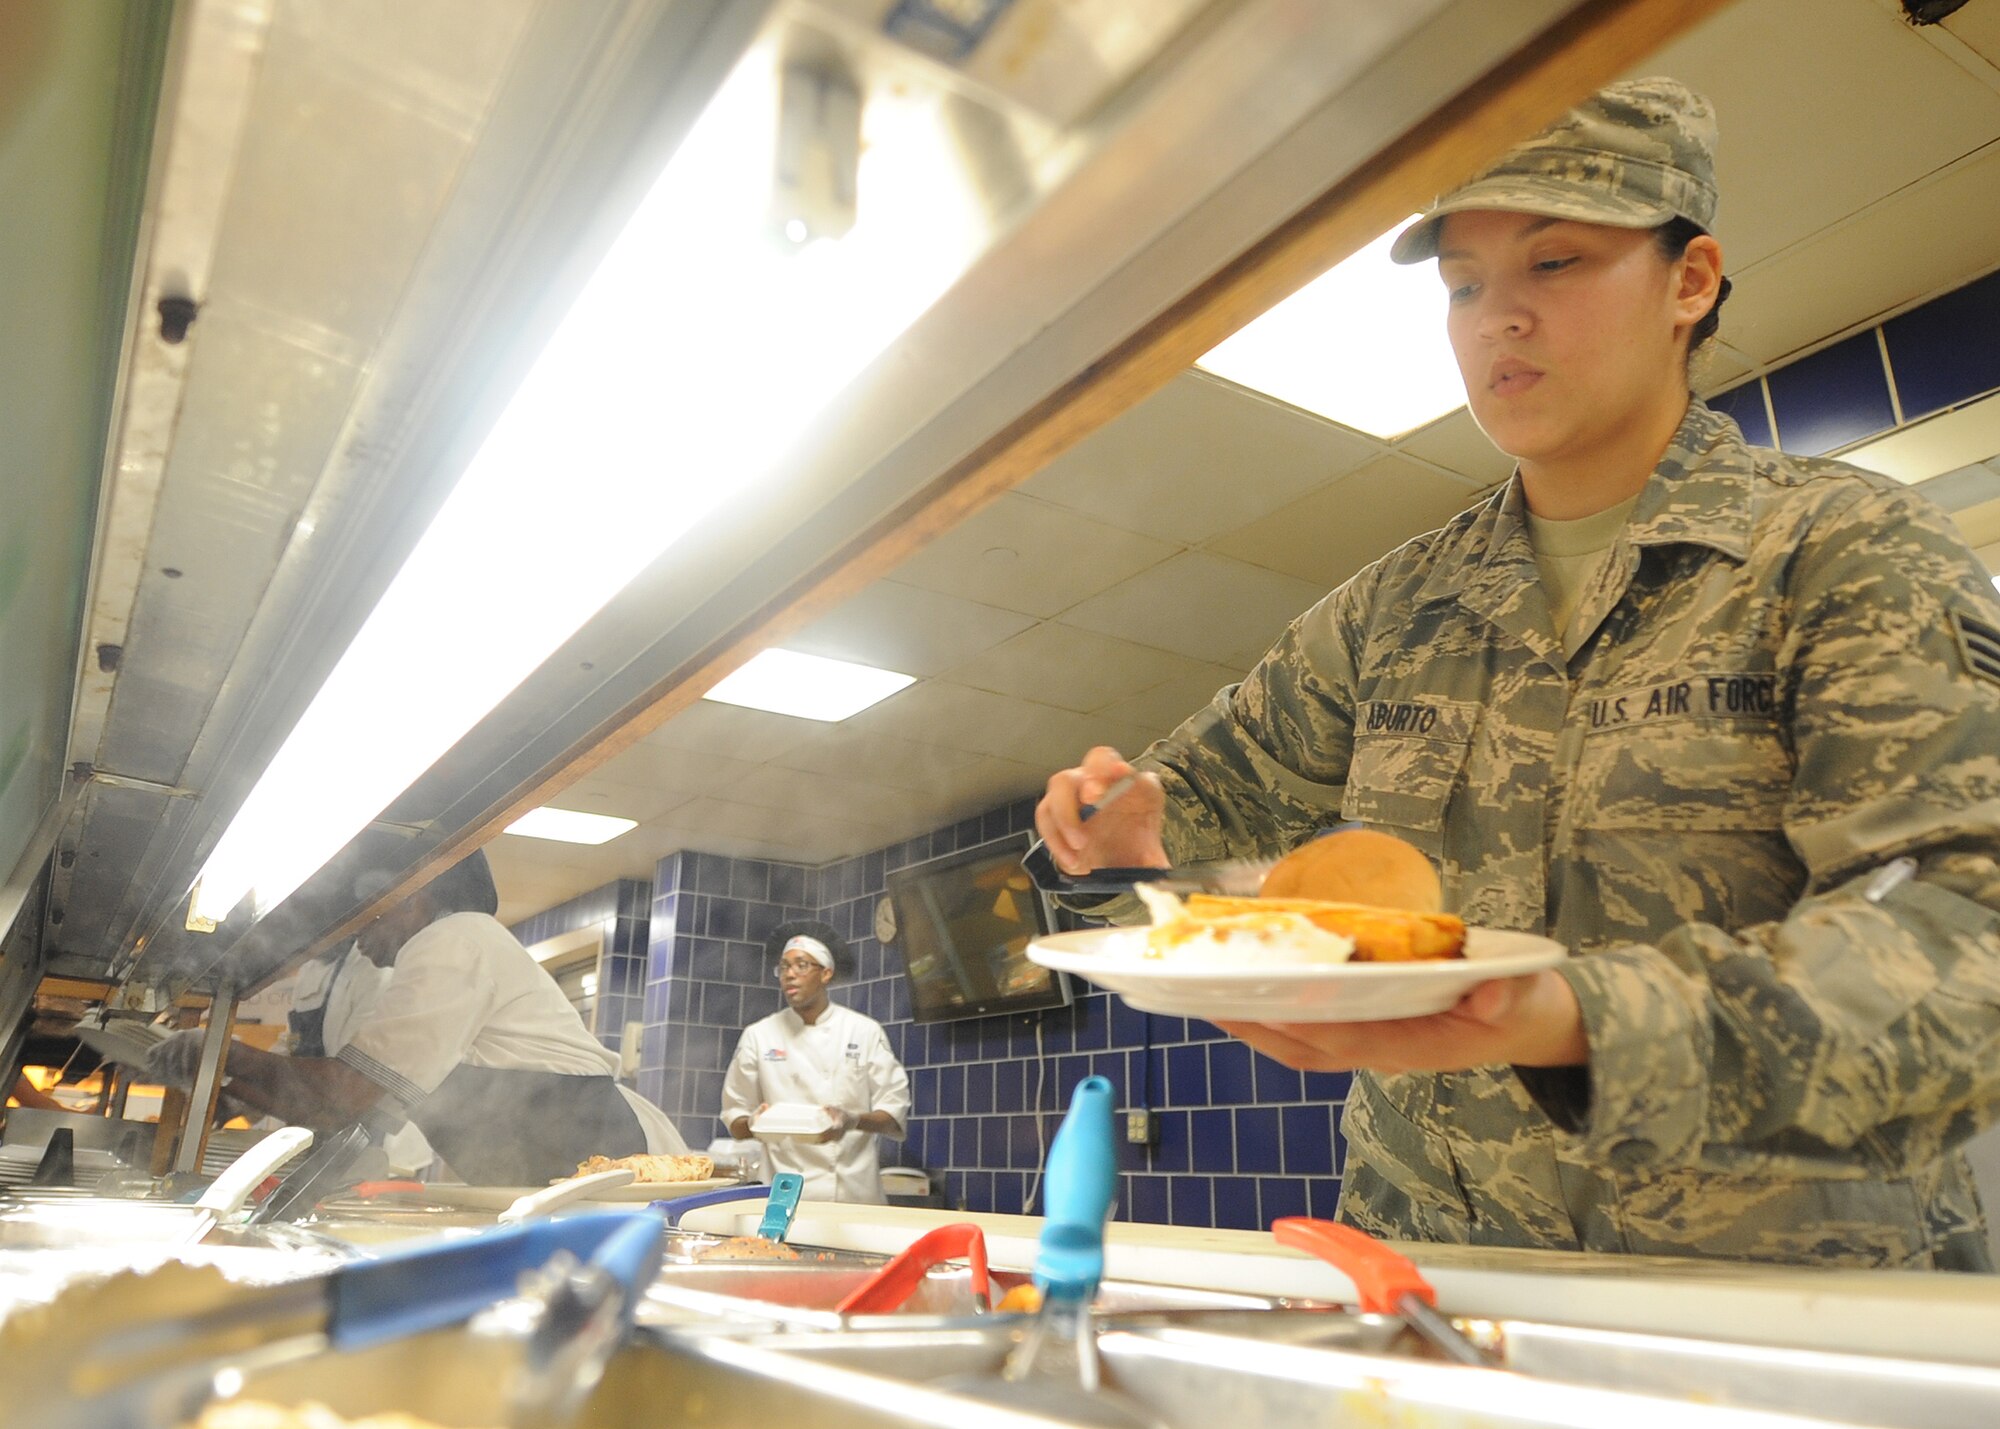 ALTUS AIR FORCE BASE, Okla. – U.S. Air Force Senior Airman Erika Aburto, 97th Force Support Squadron food service technician, prepares a plate of food at the Solar Inn Dining Facility June 6, 2014. The dining facility is an essential part of the Altus AFB mission, replenishing Airmen with four meals a day to keep the mission going of forging combat mobility forces and deploying Airmen warriors.   (U.S. Air Force photo by Senior Airman Levin Boland/Released) 